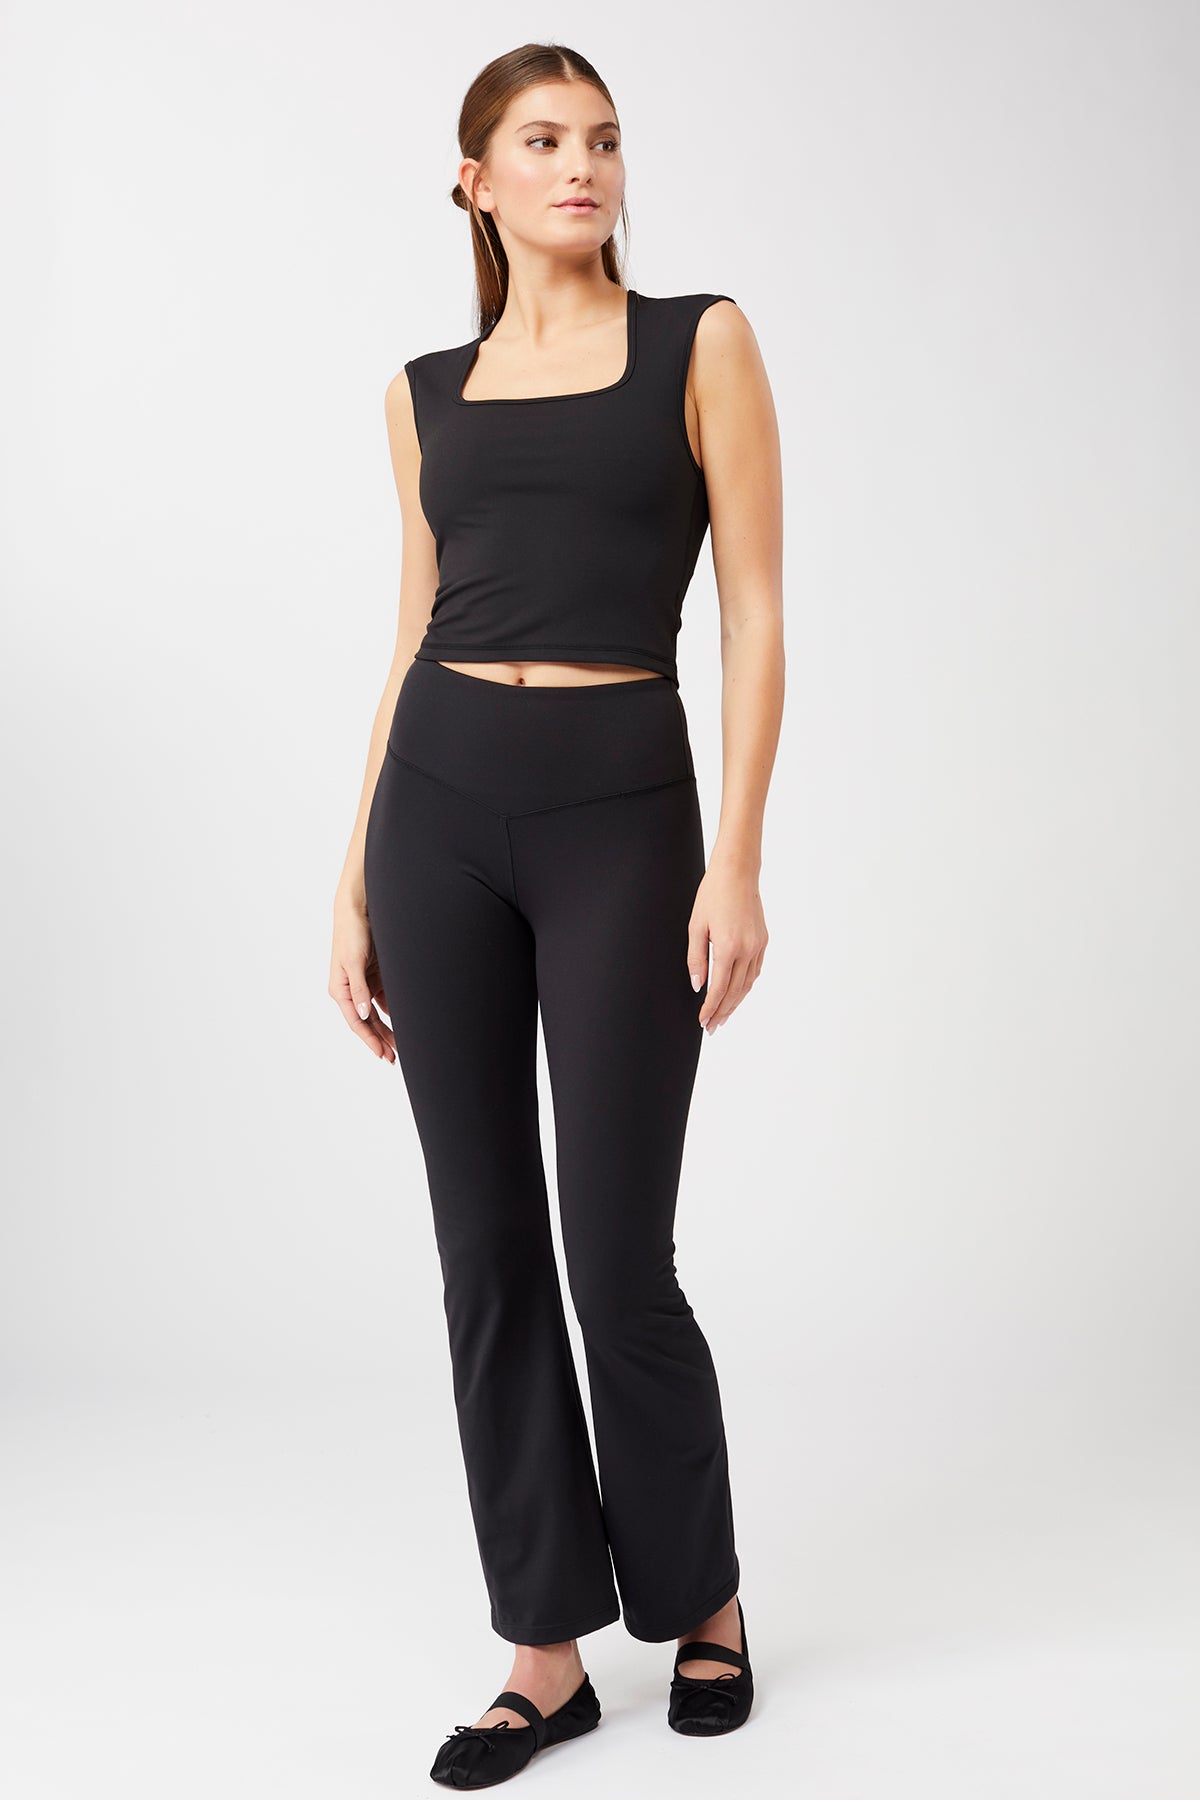 Yoga Wear out of recycled polyester – Page 2